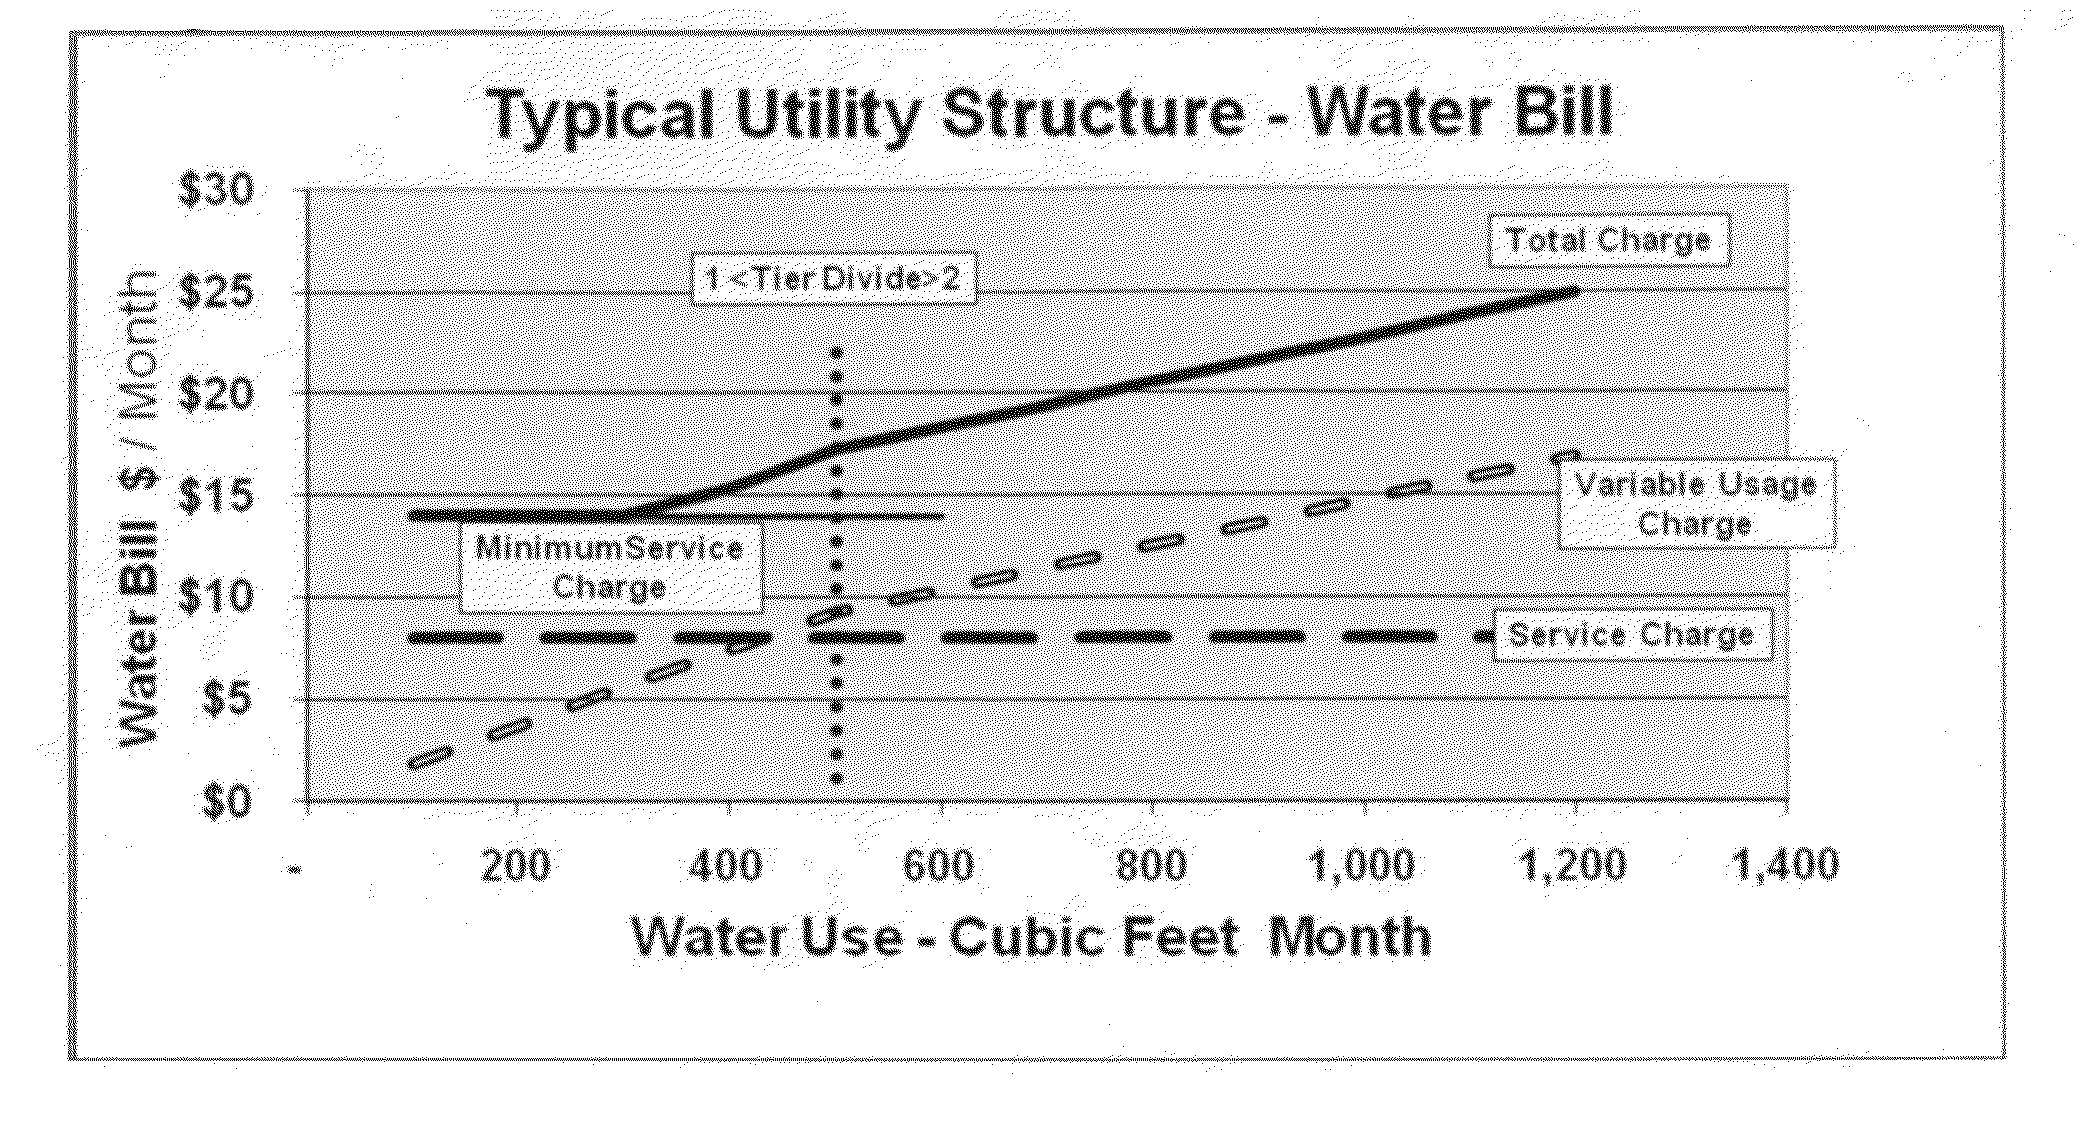 Conservation friendly water & water reclamation utility rate structure